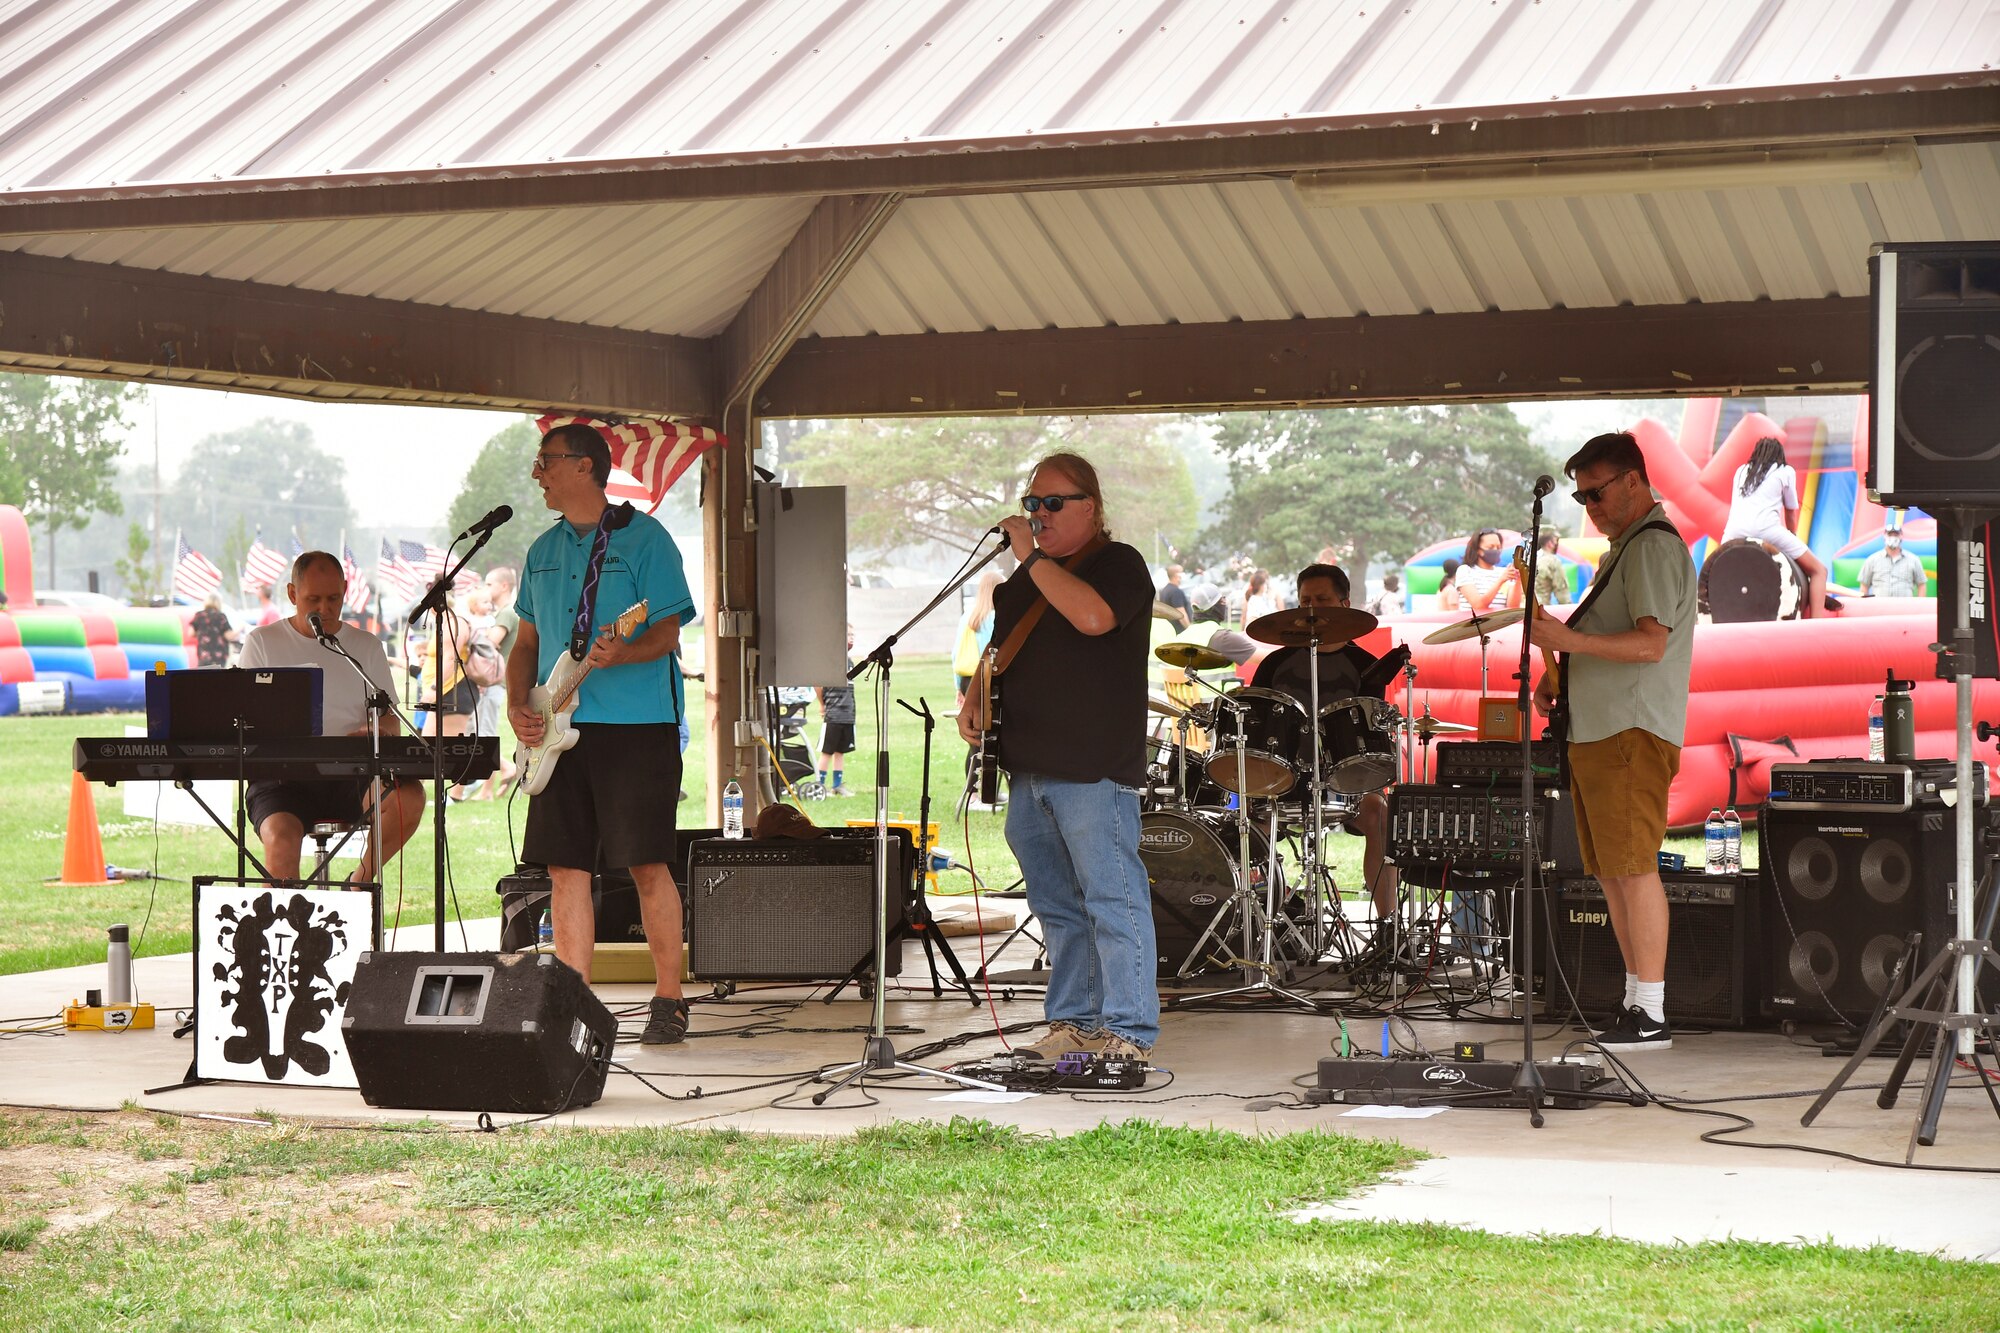 A music band performing underneath a pavilion.